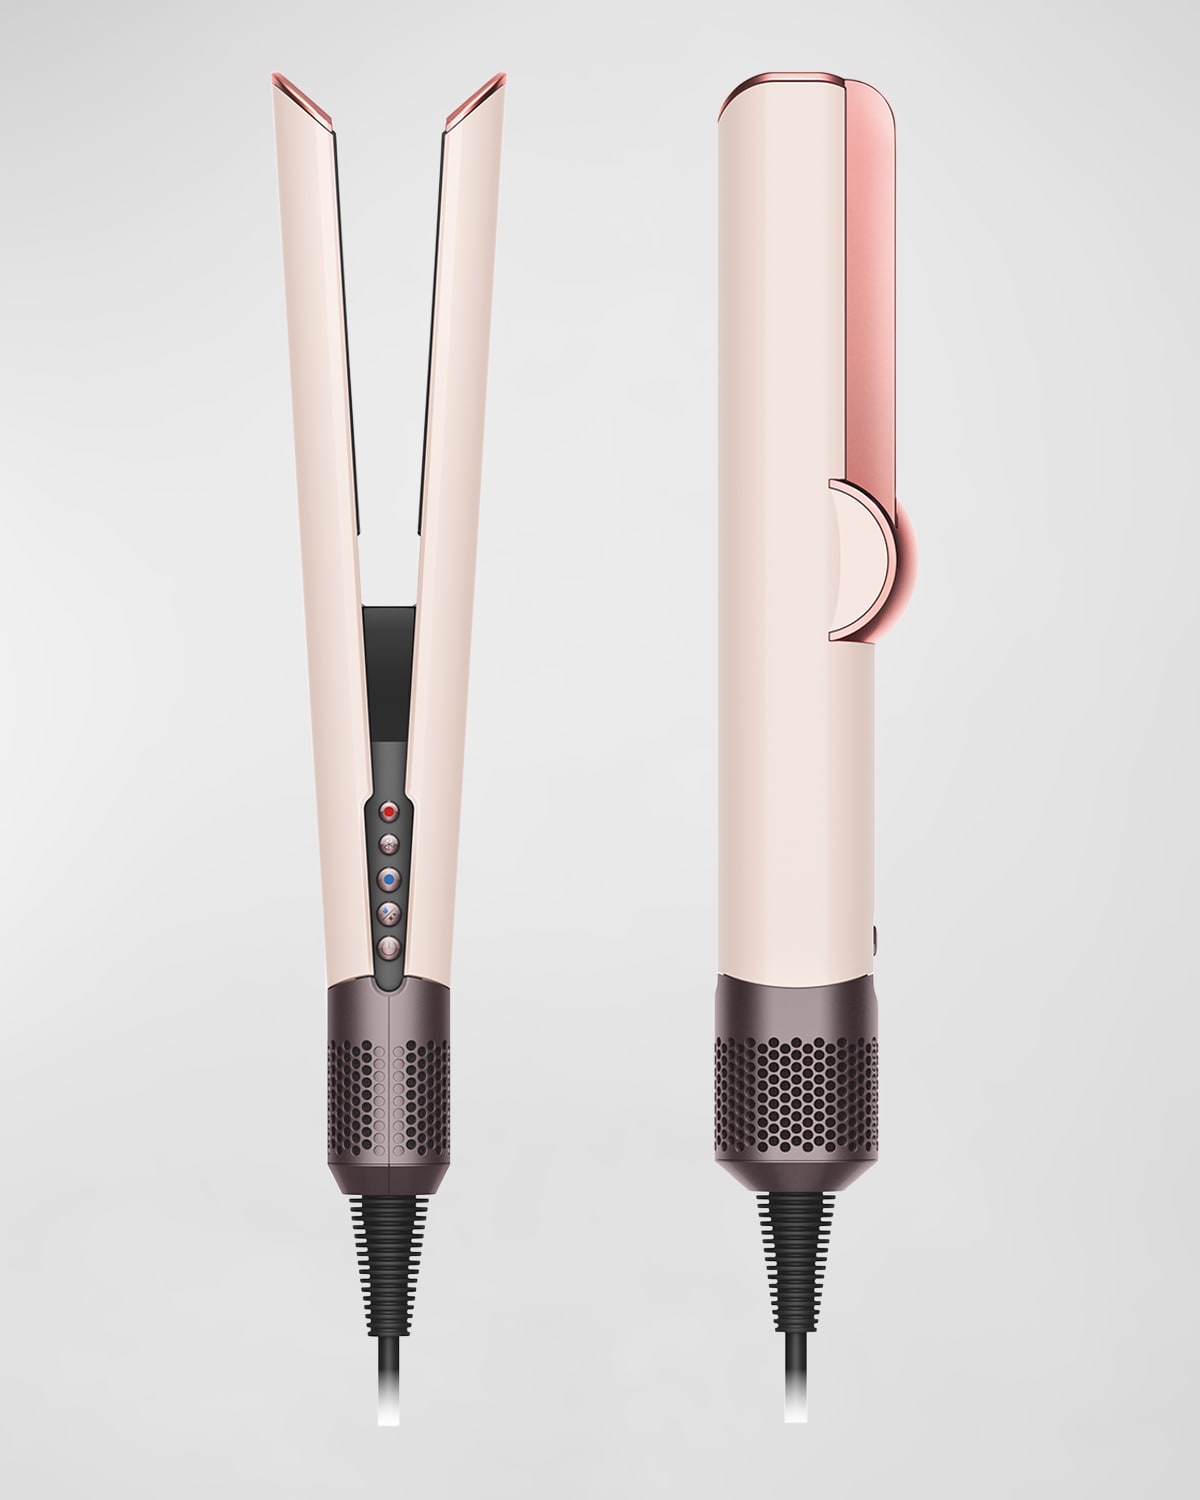 Limited Edition Airstrait Straightener in Ceramic Pink and Rose Gold